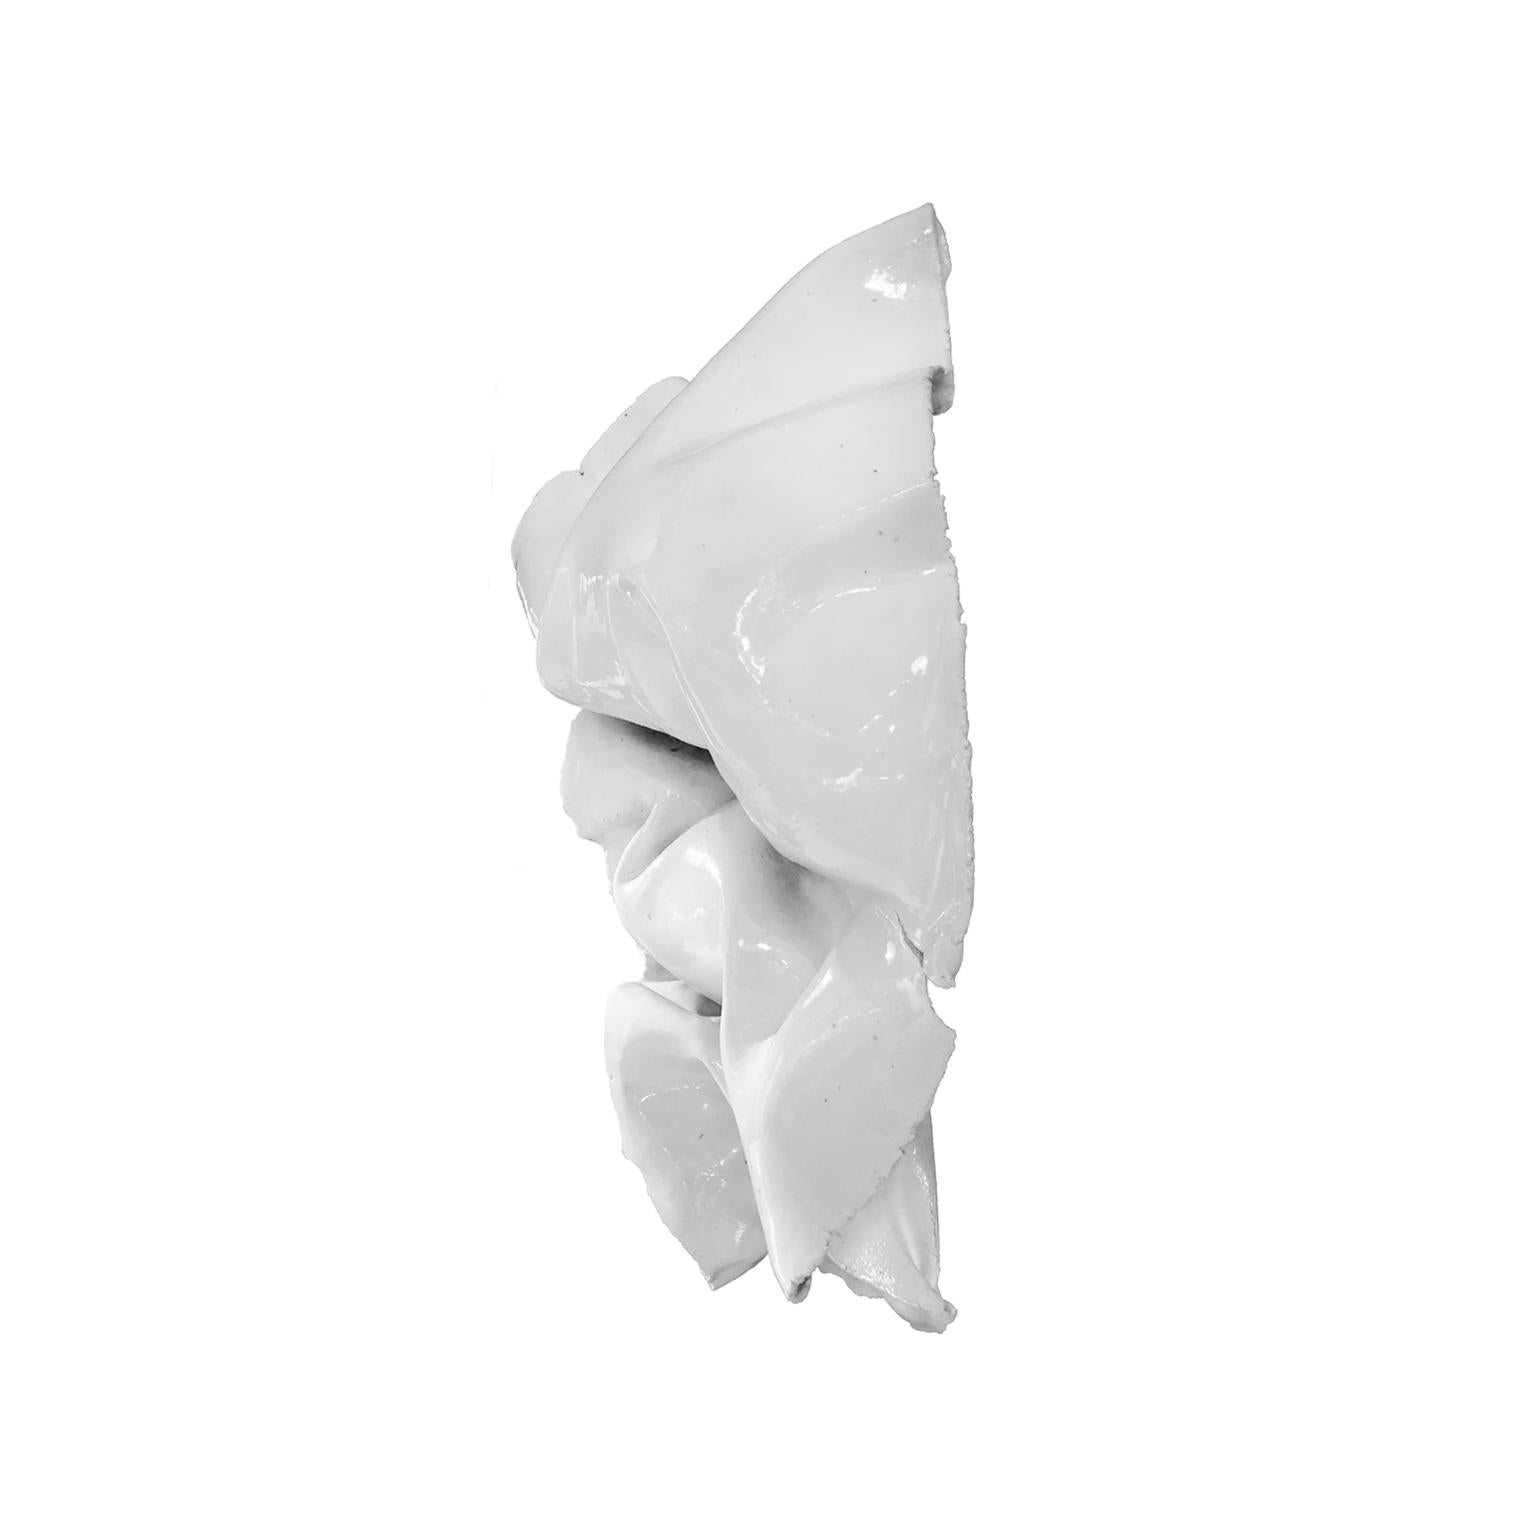 American Abstract Crumpled Ceramic Wall Sculpture #3 by Evan Blackwell